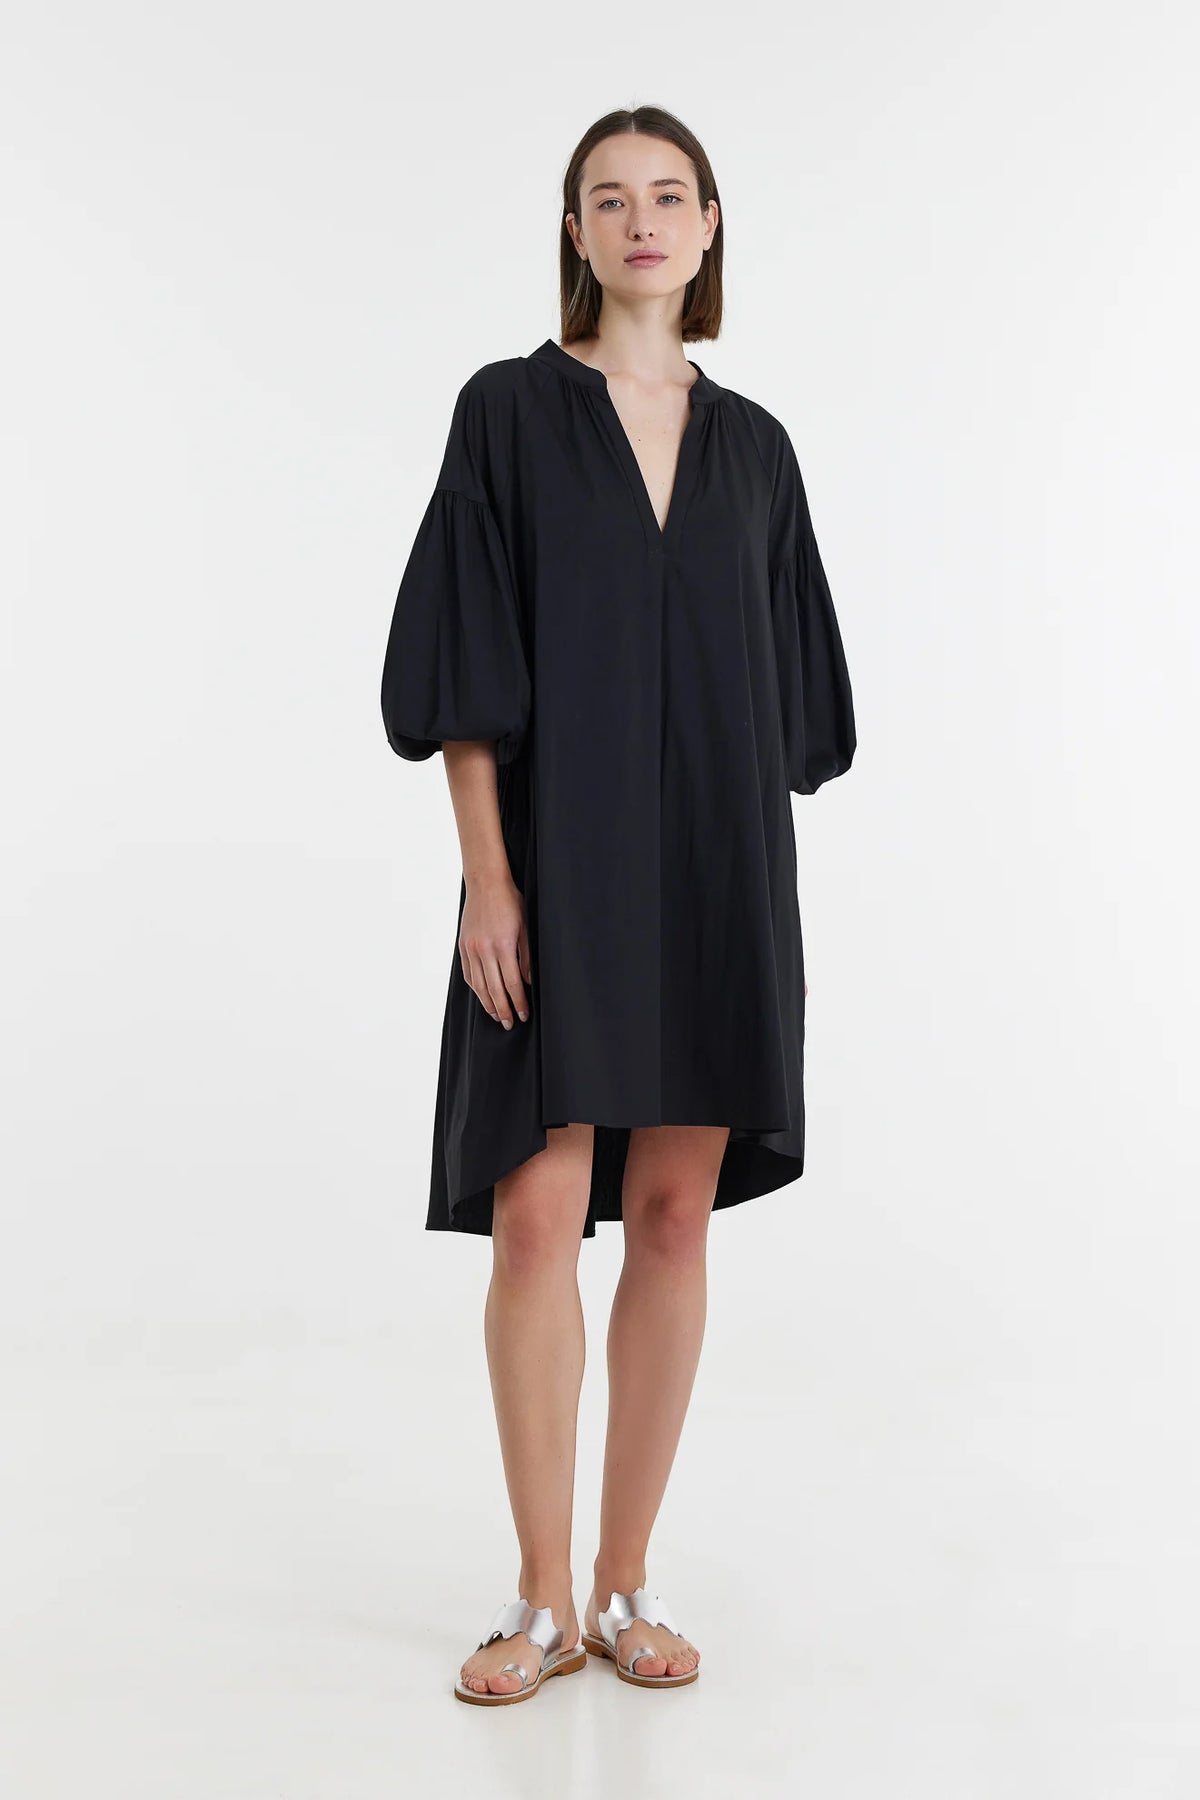 Black knee length trapeze dress with notch neck and three quarter length sleeves with elasticated cuffs